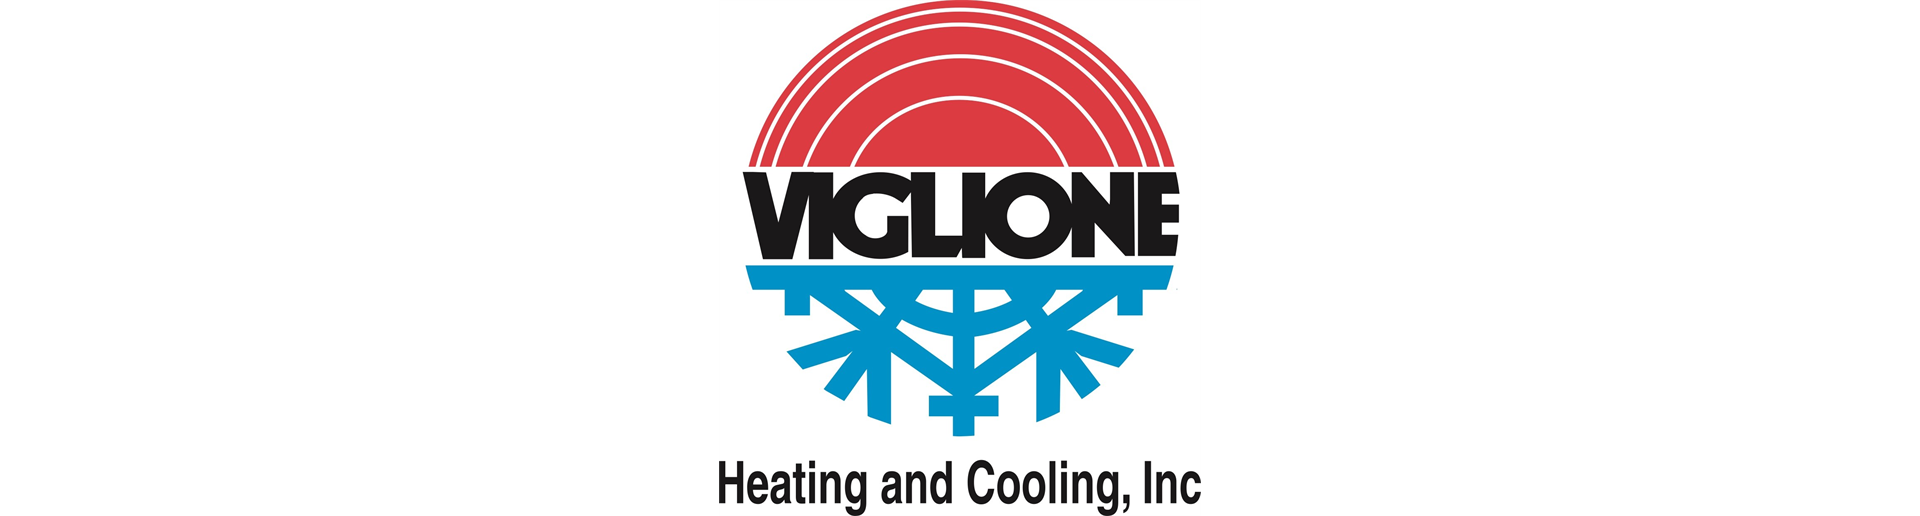 Viglione Heating and Cooling Inc.